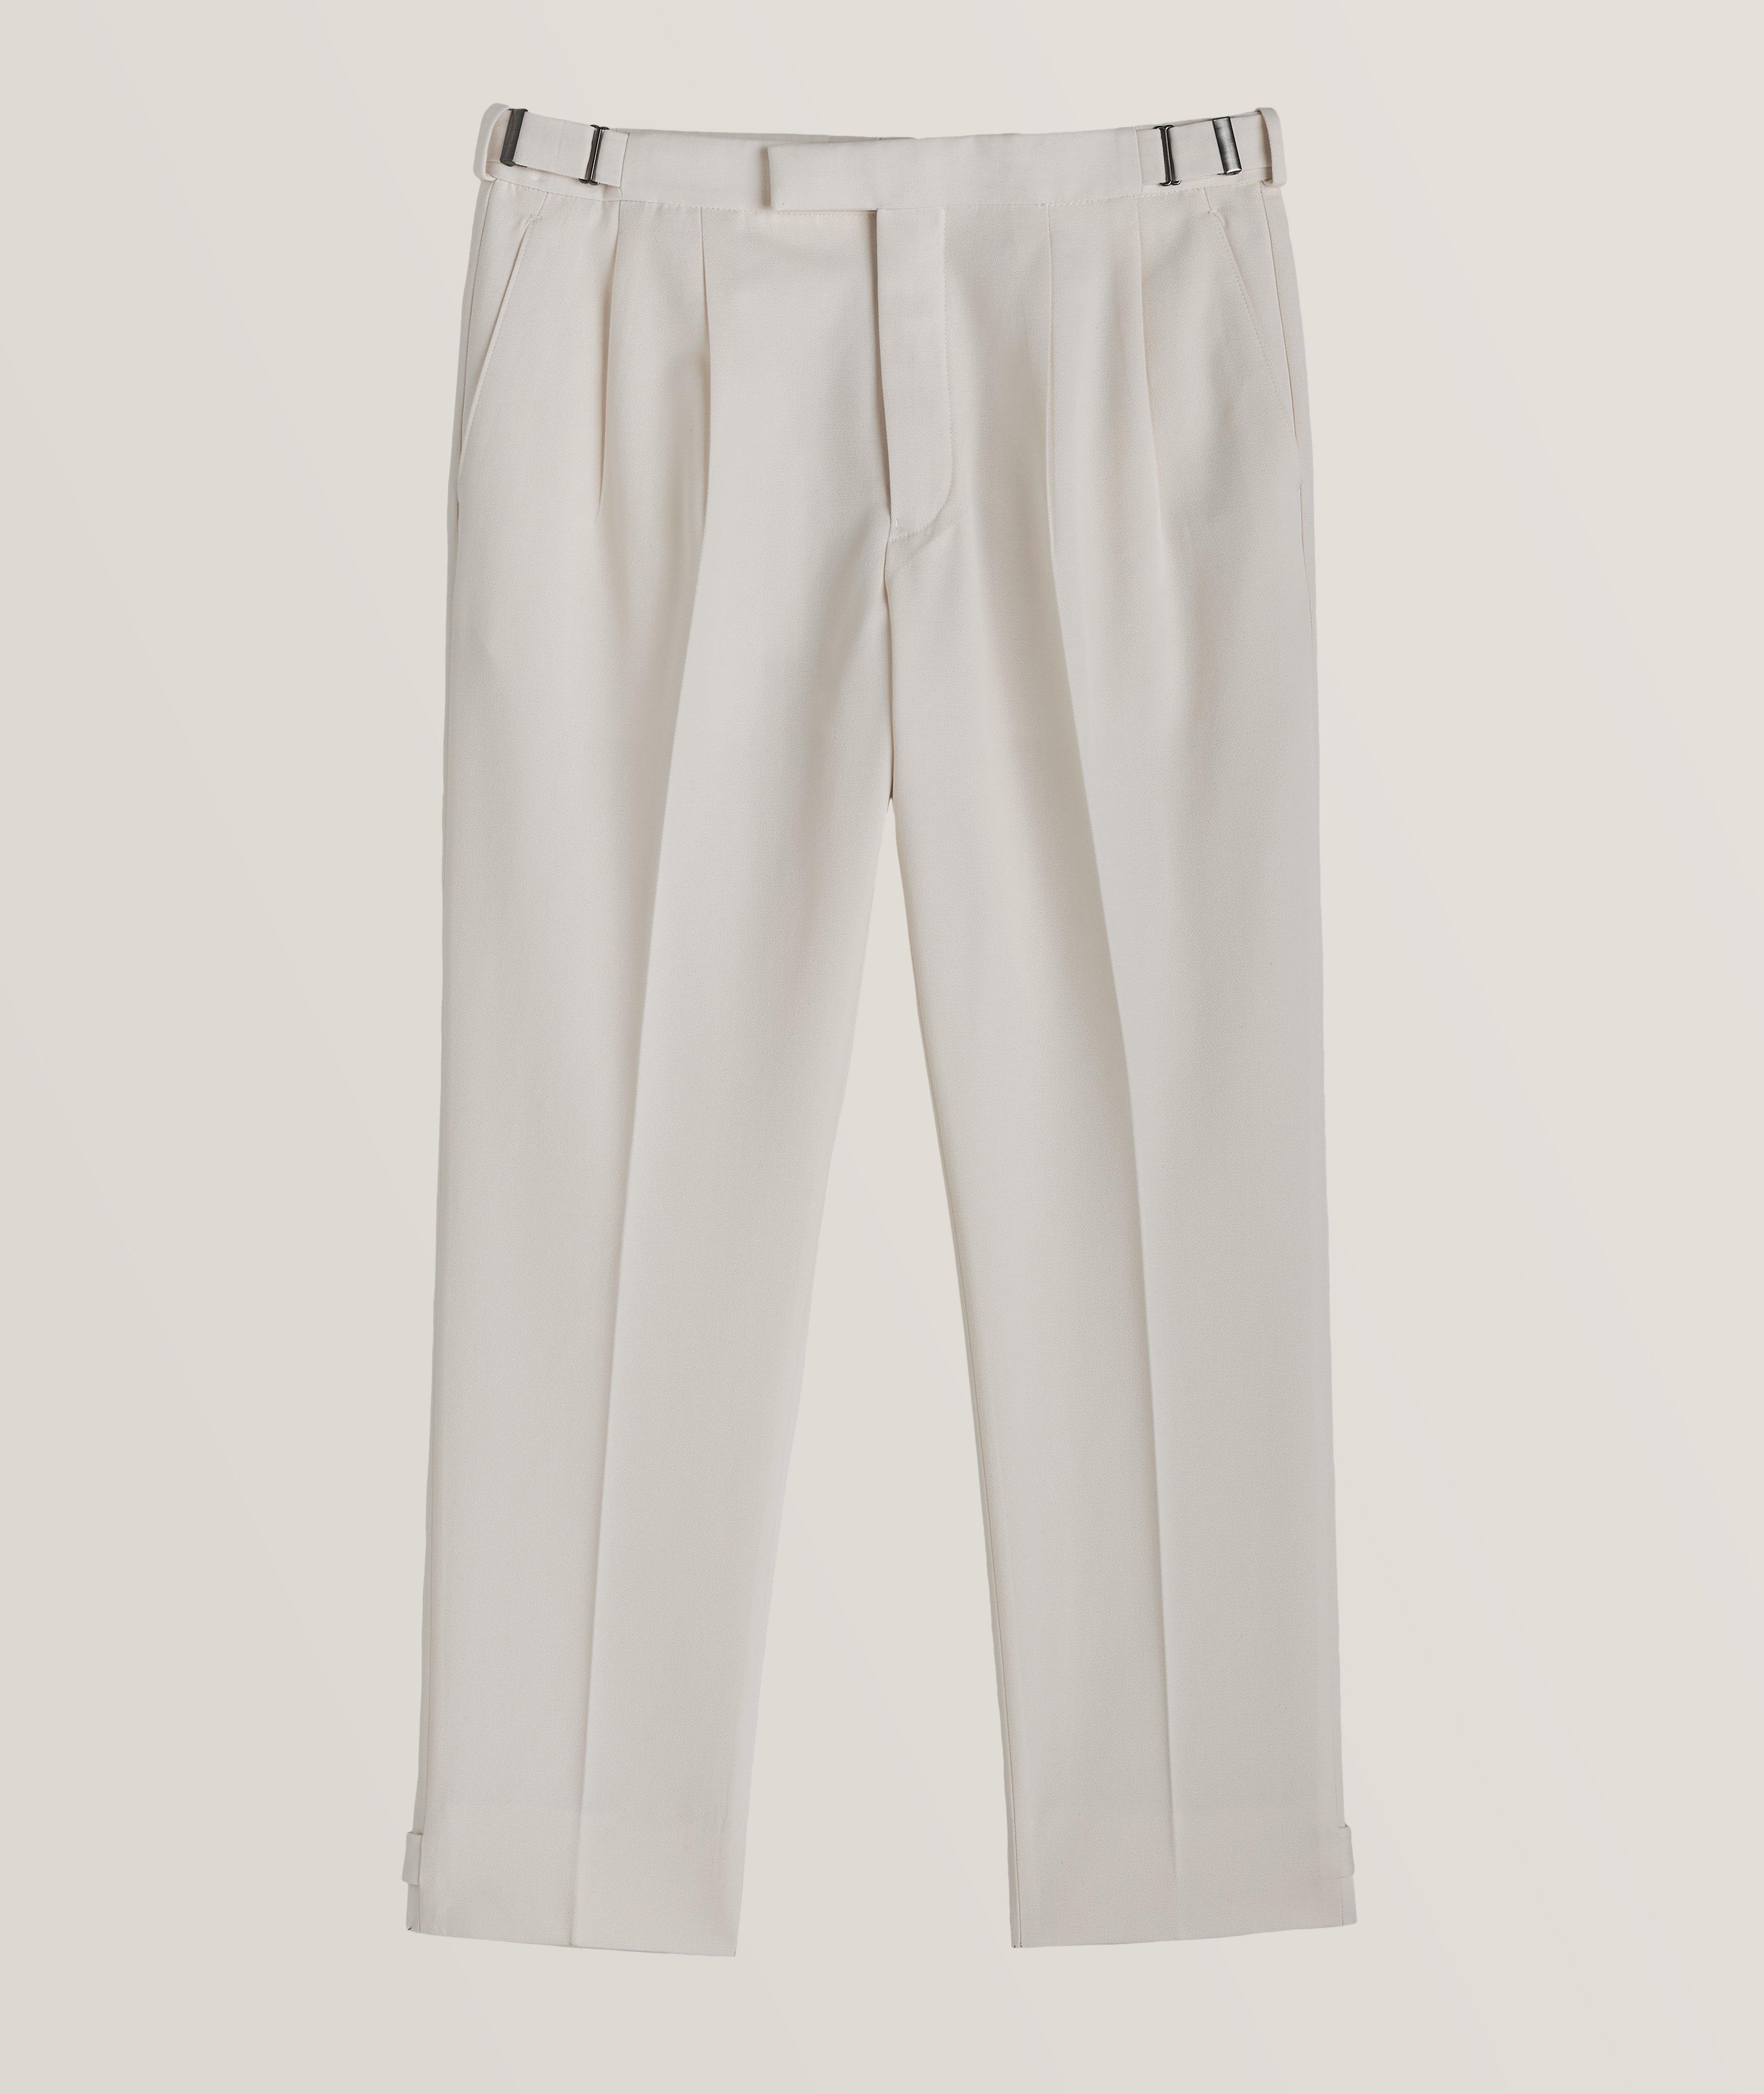 Cotton-Wool Double Pleated Pants image 0